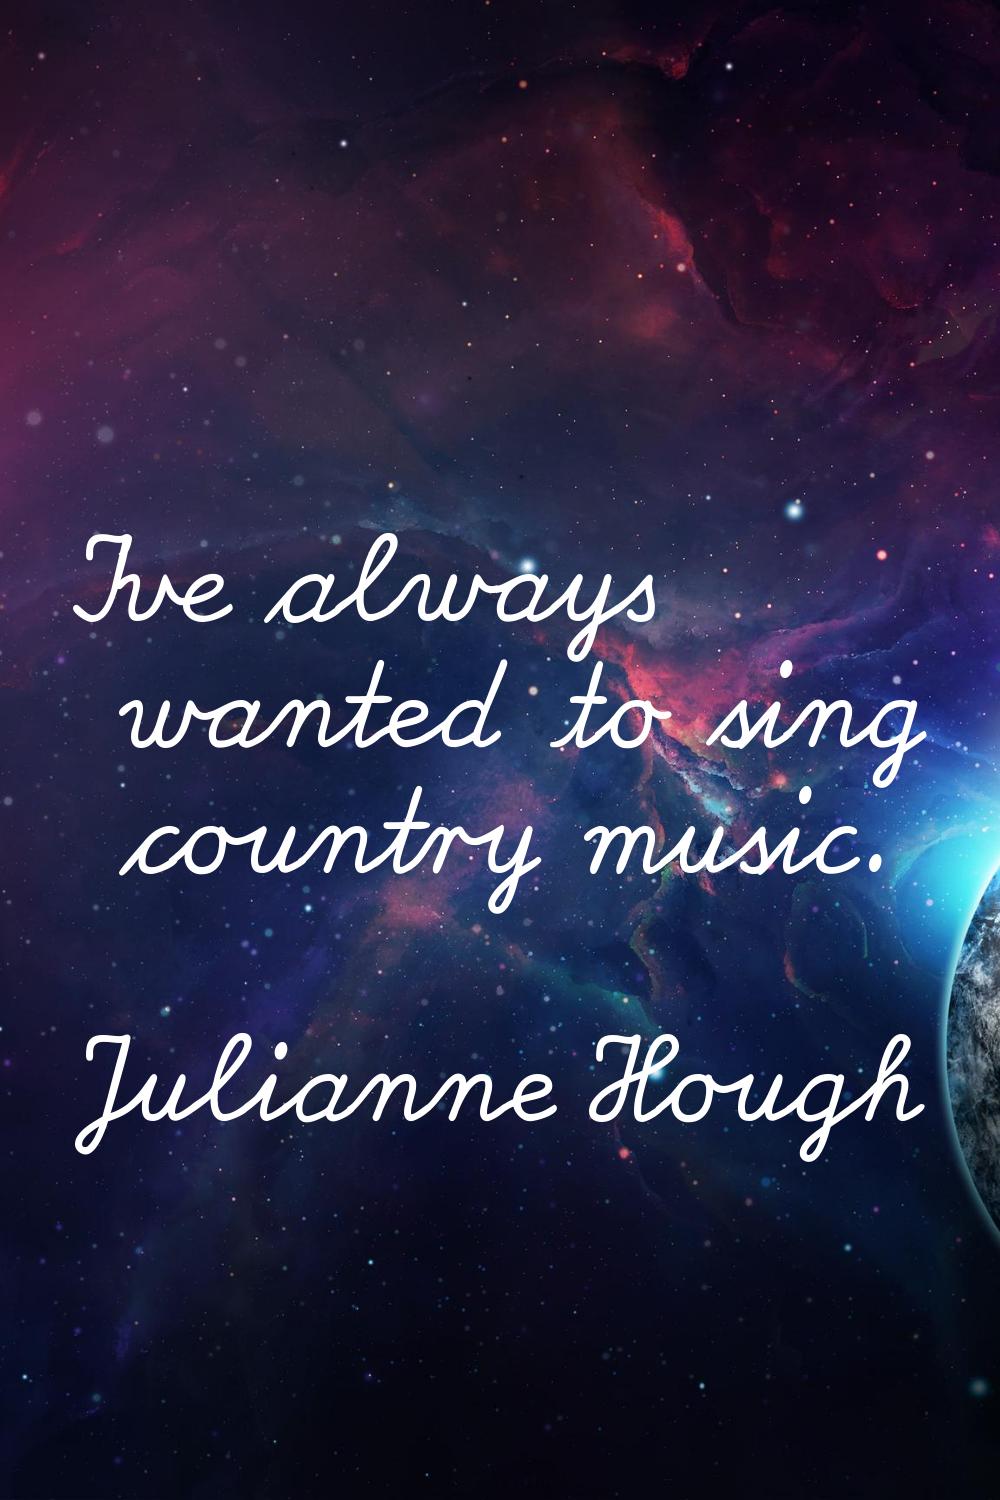 I've always wanted to sing country music.